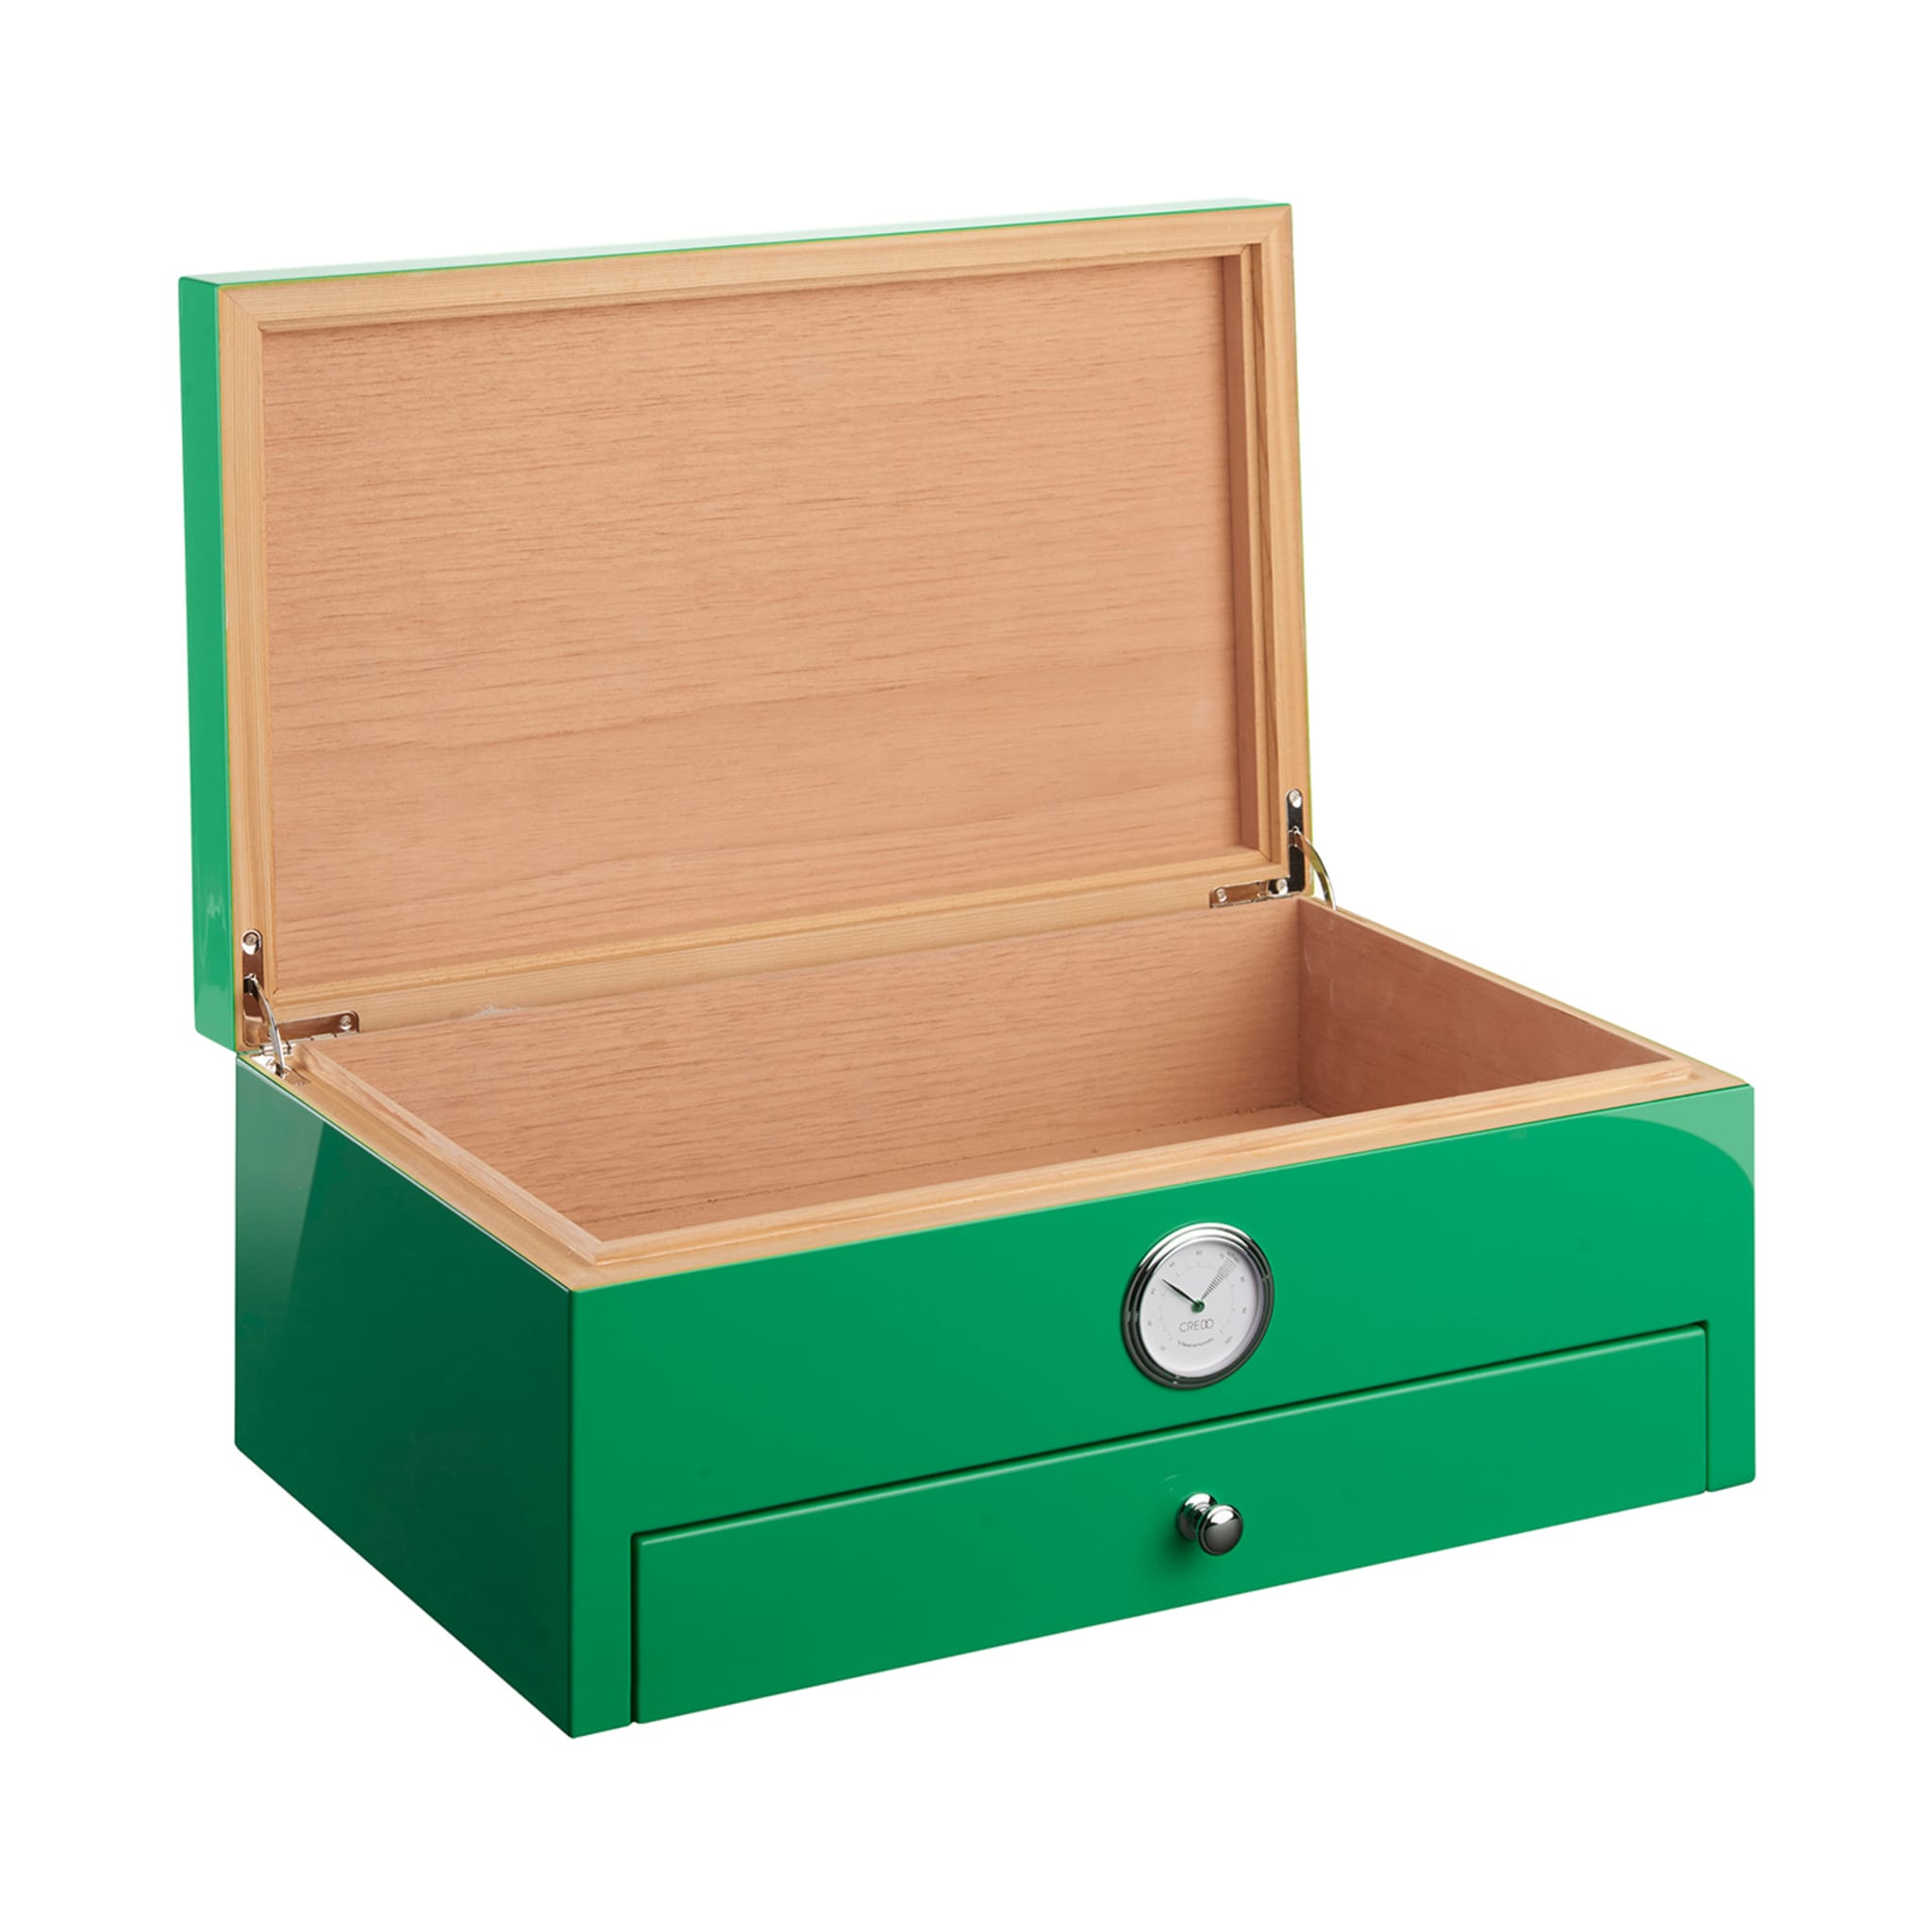 Full Color Green Humidor (Special Club Edition)  - Alternative view 1